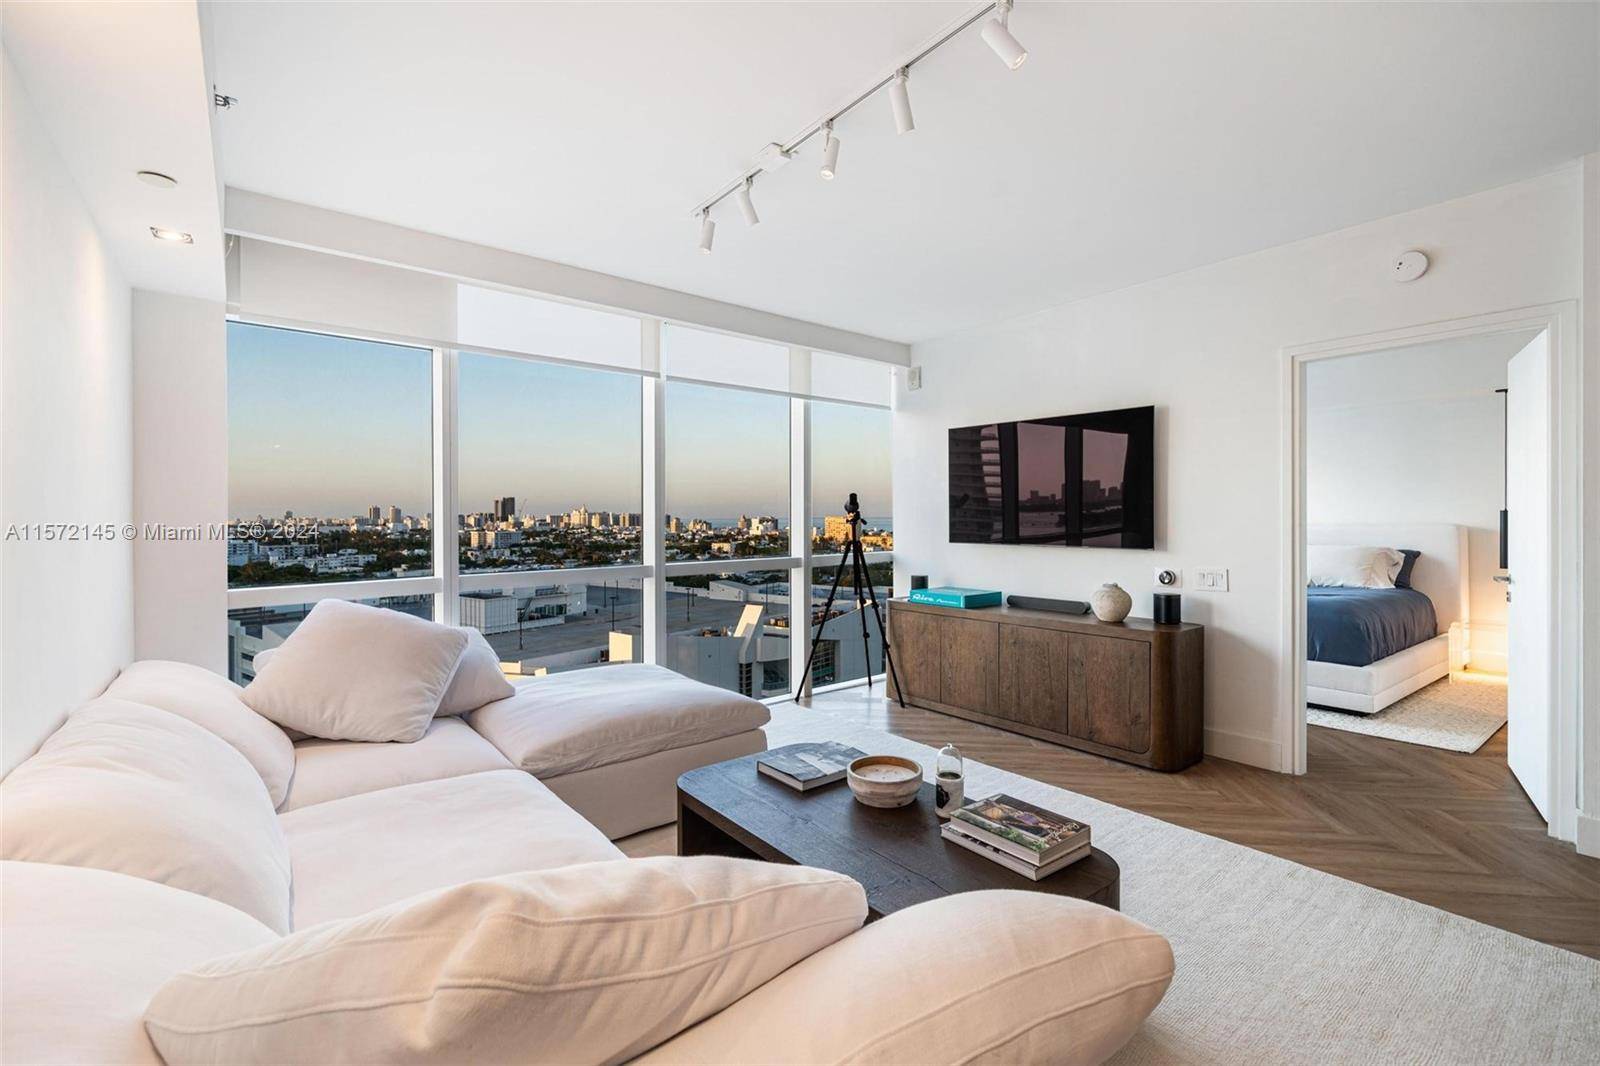 Experience luxury in this 851 sqft, fully renovated 1 bedroom apartment in South of Fifth at Icon South Beach.